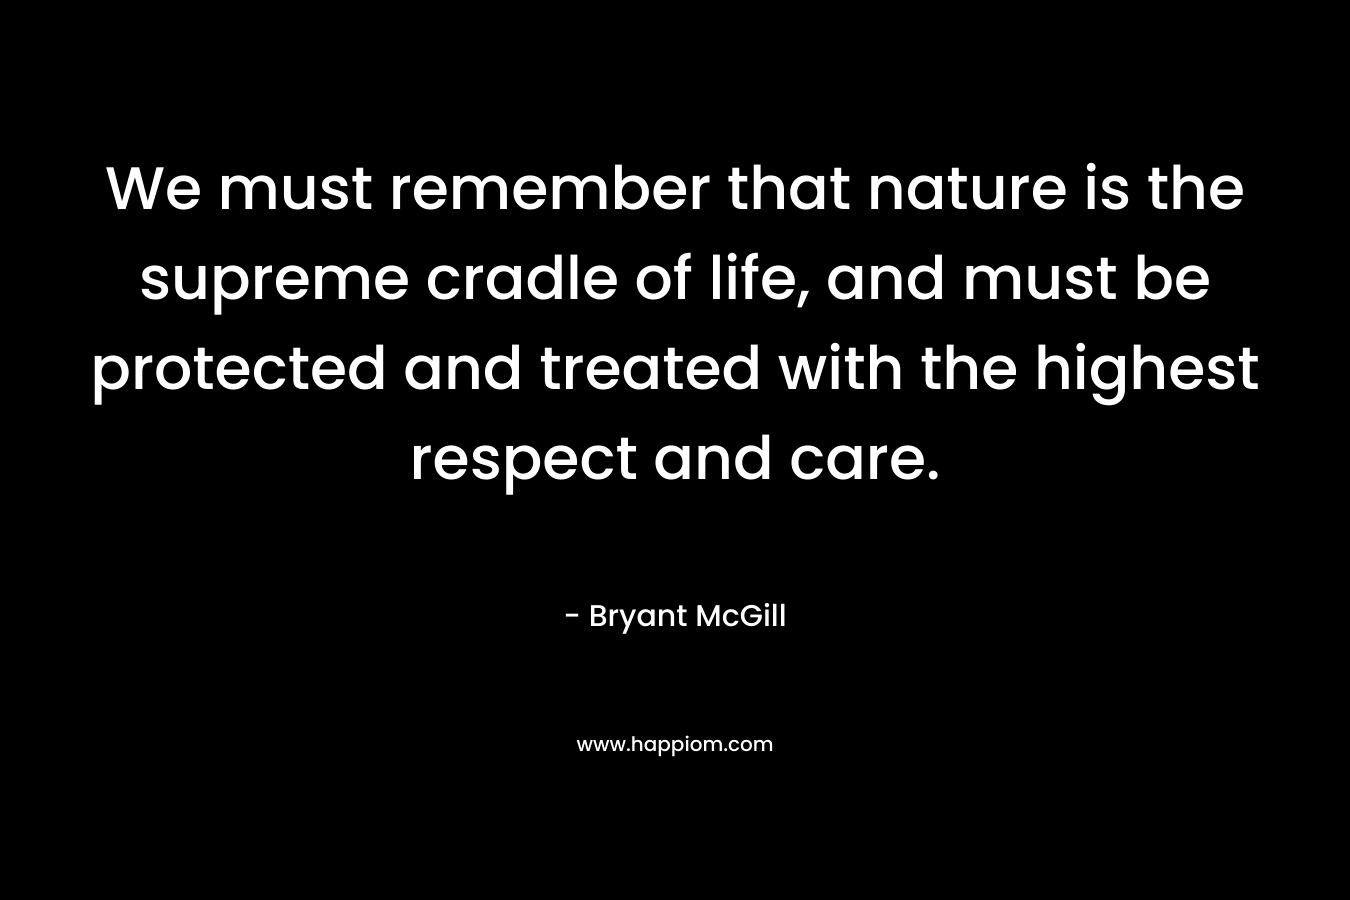 We must remember that nature is the supreme cradle of life, and must be protected and treated with the highest respect and care. – Bryant McGill